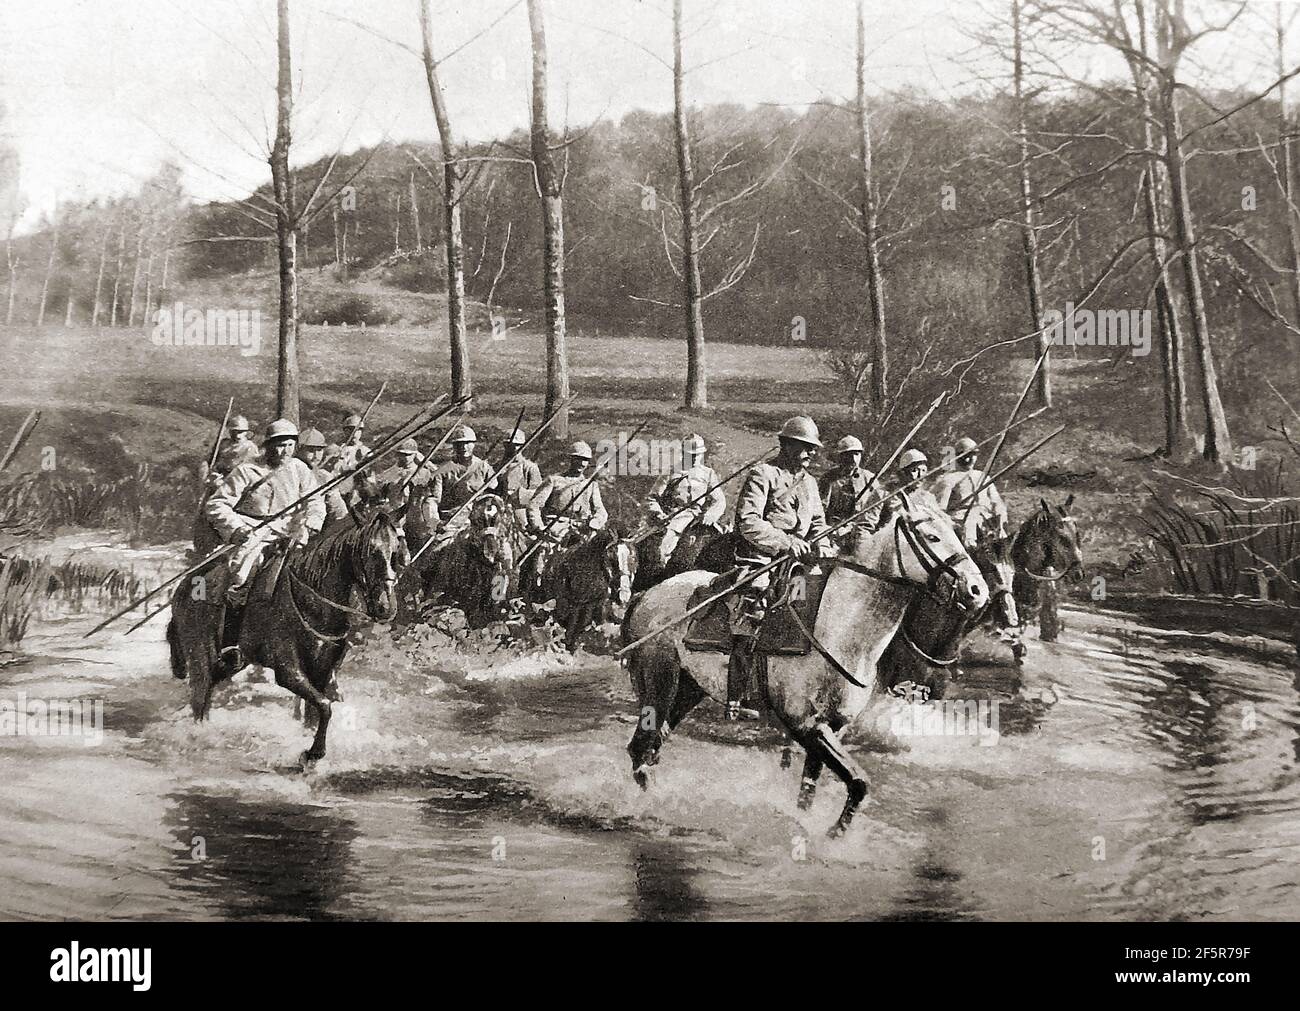 WWI - French Dragoons   near the front. They were considered one of the finest cavalry units of their time. Dragoons originally were a class of mounted infantry, who   dismounted  from their horses to fight on foot. From the early 17th century  dragoons were  employed as conventional cavalry and trained for combat with swords  or spears and firearms whilst still on horseback . The name dragoon  is derived from a type of firearm, called a dragon, which was a handgun version of a blunderbuss. The modern French Army retains three dragoon regiments of  the original  32 of WWI. Stock Photo